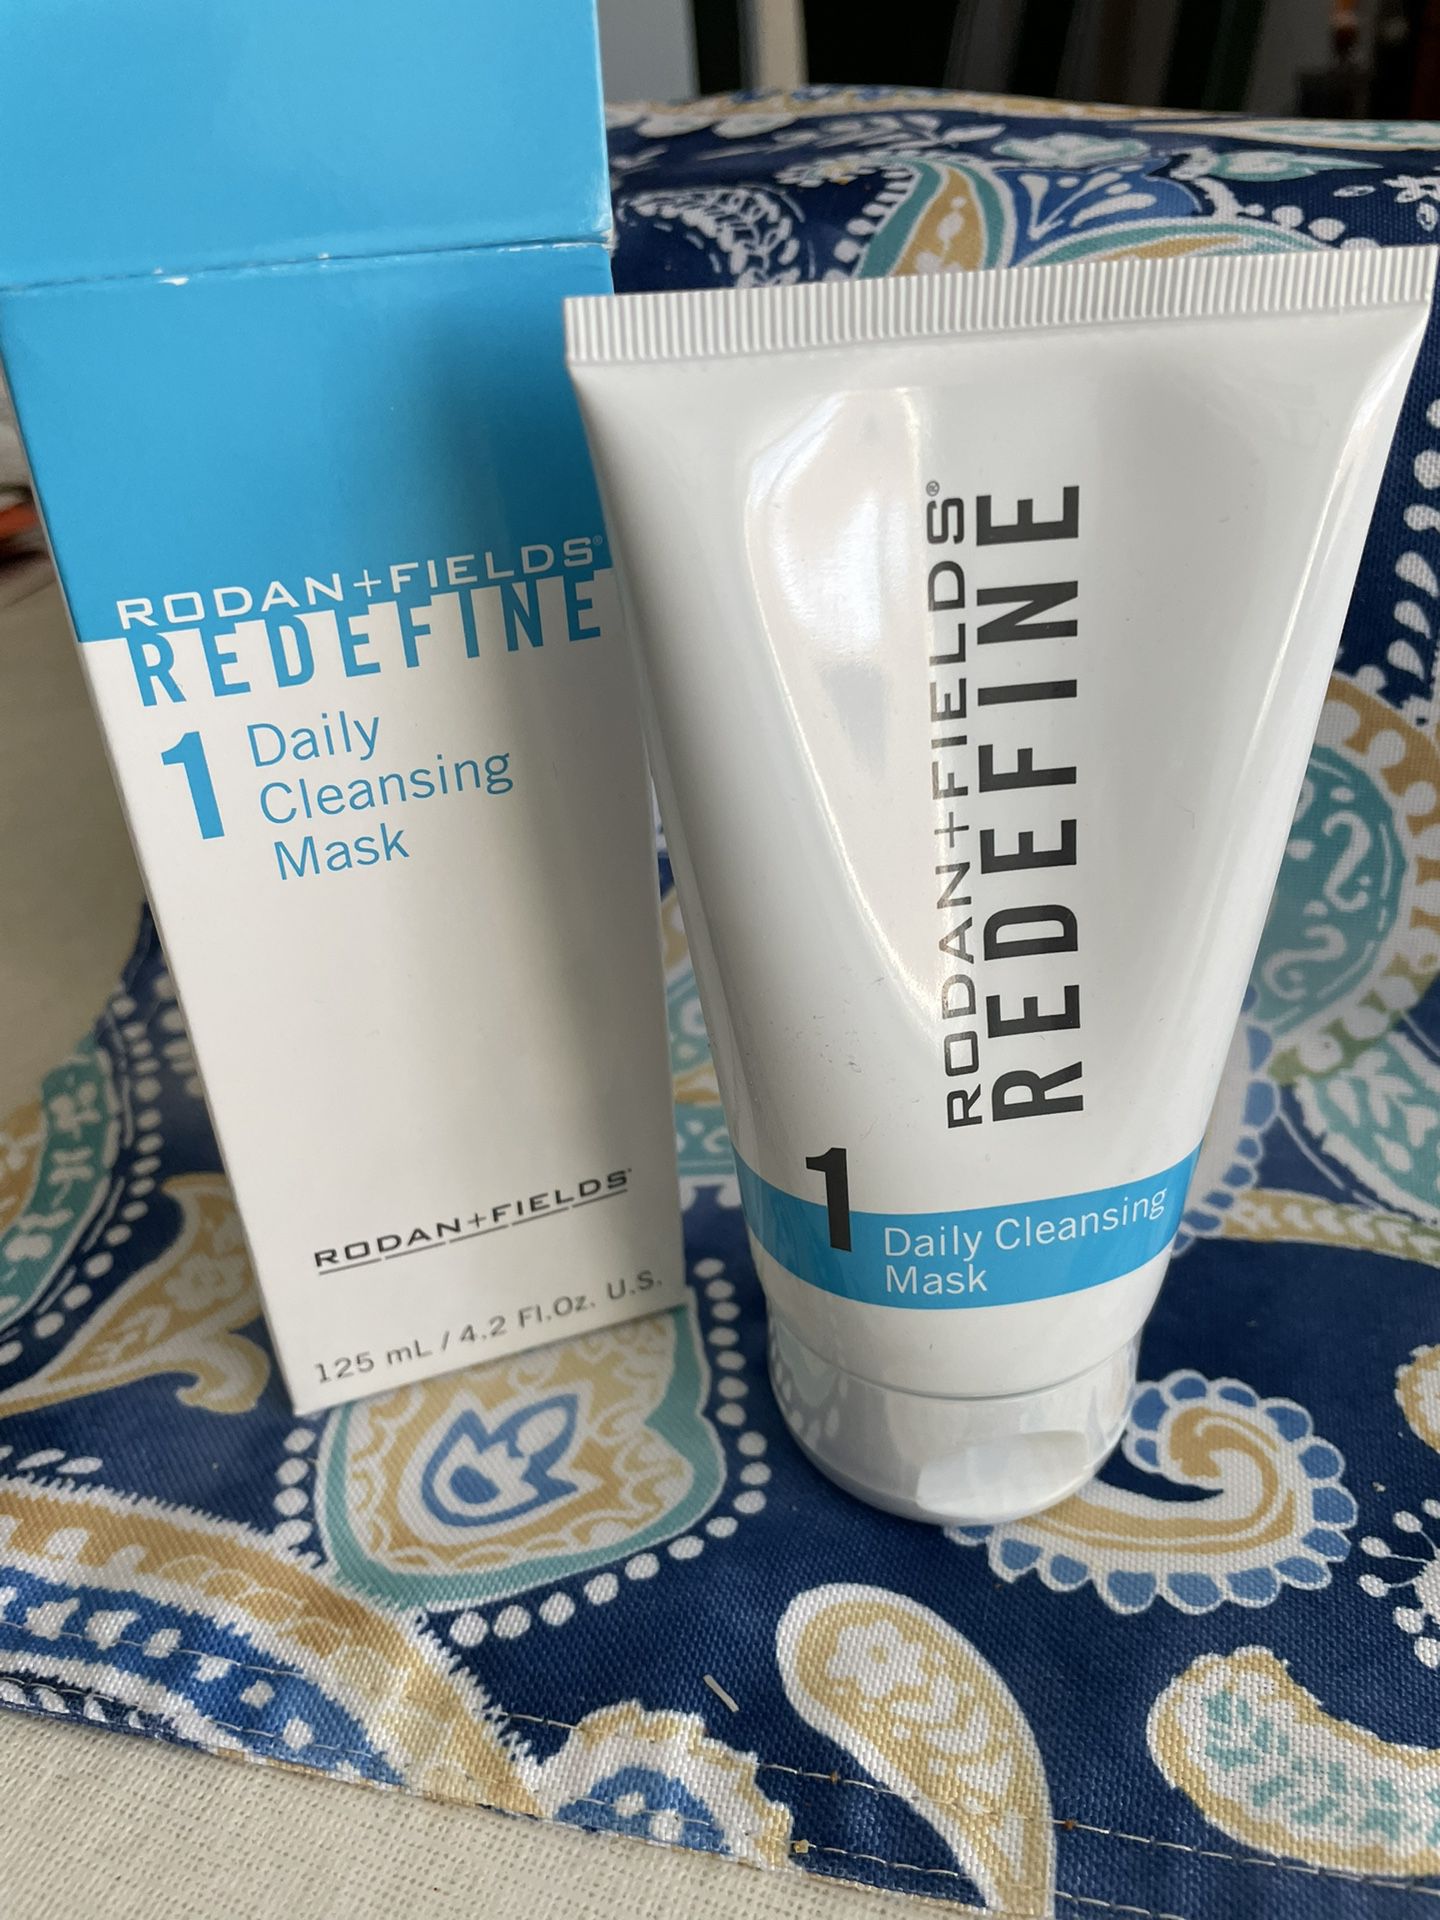 Rodan And Fields redefine Clay Cleanser Mask NEW UNOPENED 